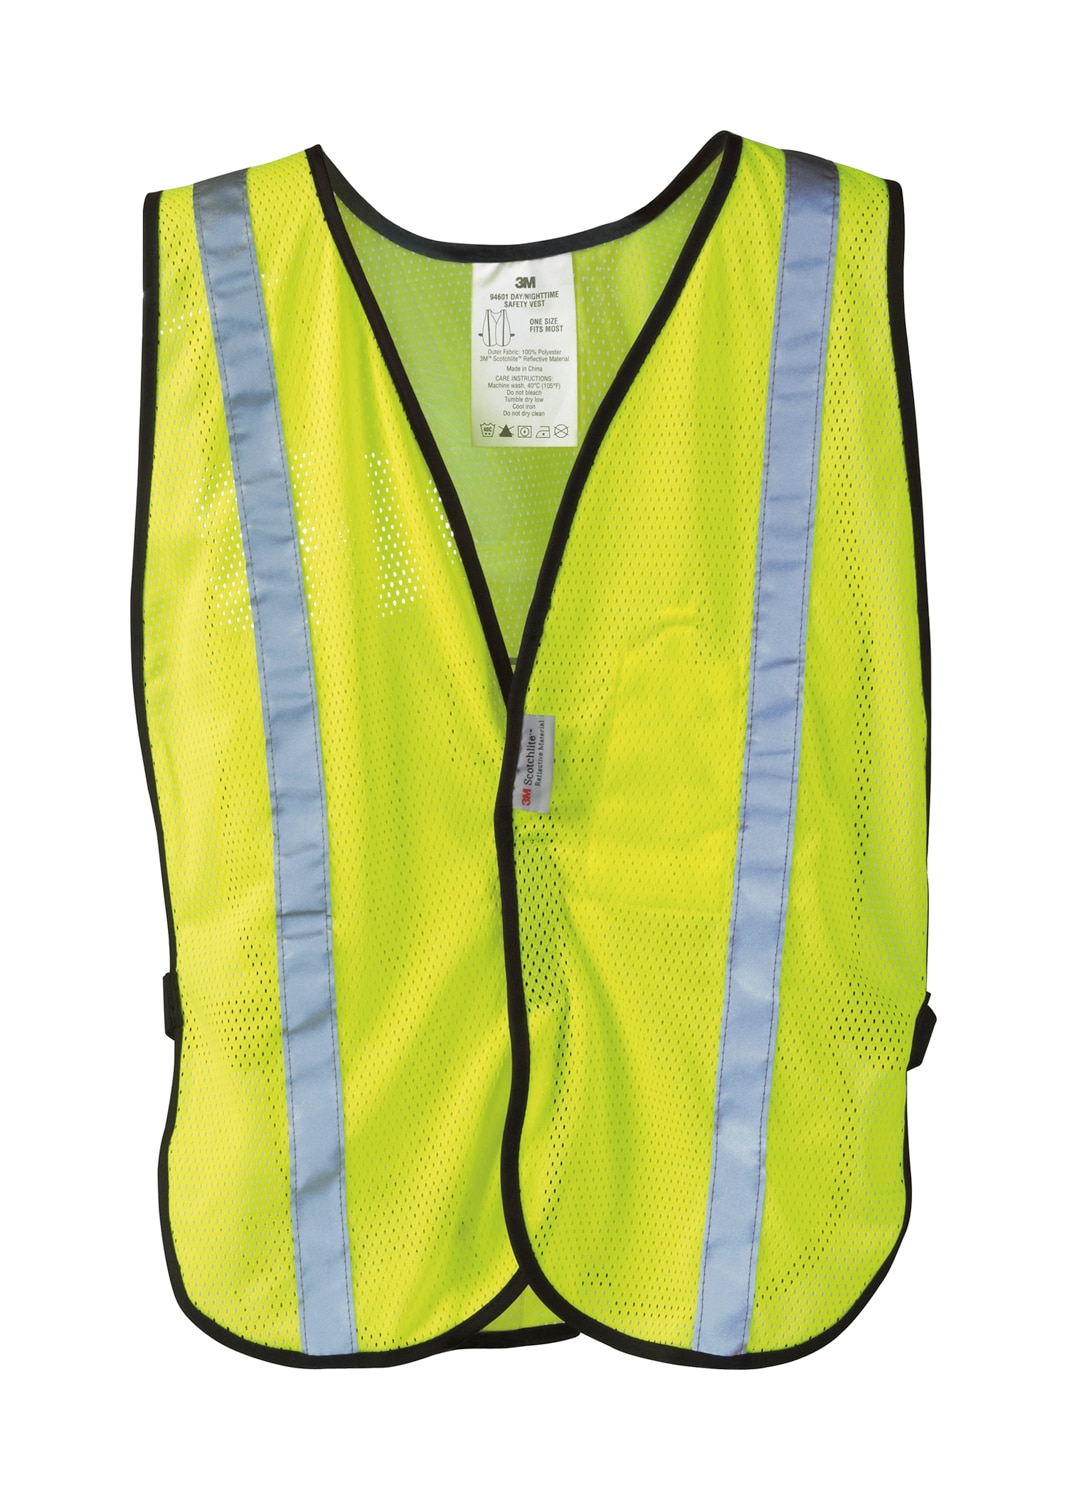 3M Yellow Polyester High Visibility (Ansi Compliant) Enhanced Visibility ( Reflective) (Large) at